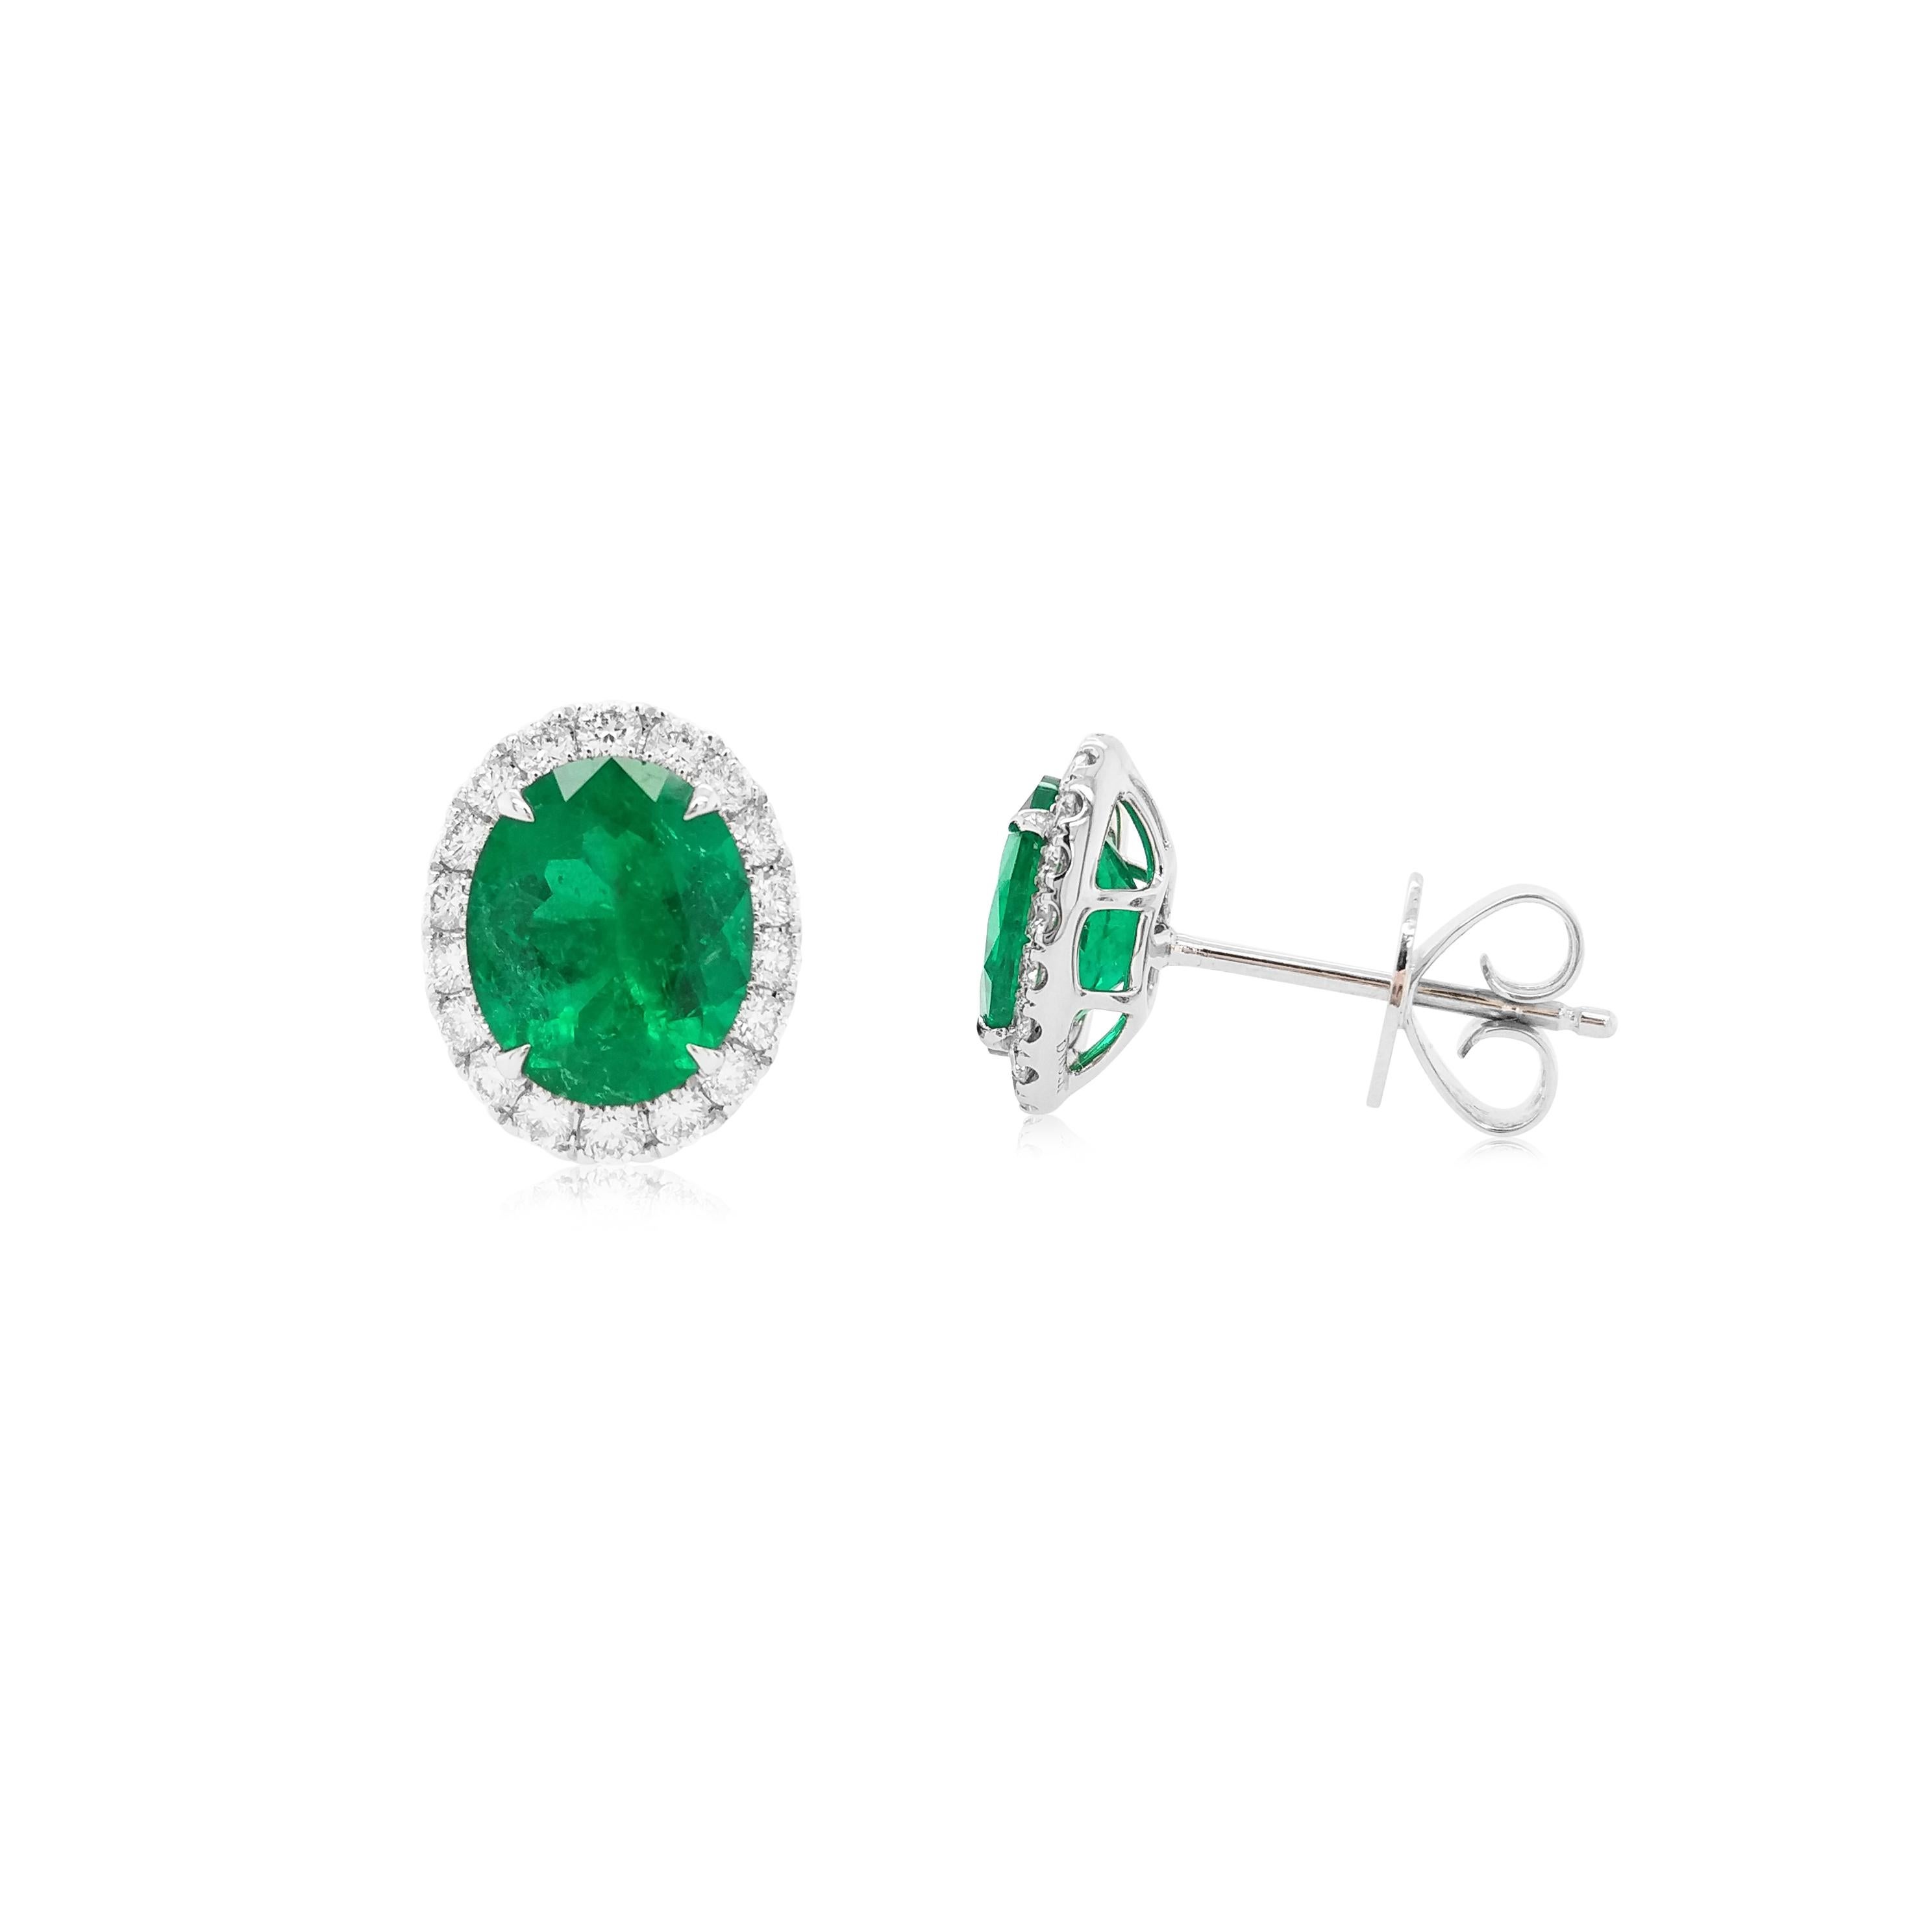 These classic earrings feature lustrous oval-shaped Colombian Emeralds at the centre of the design, with a delicate white diamond halo surrounding them. Set in 18 Karat white gold to enrich the remarkable hues of the emerald and the sparkle of the